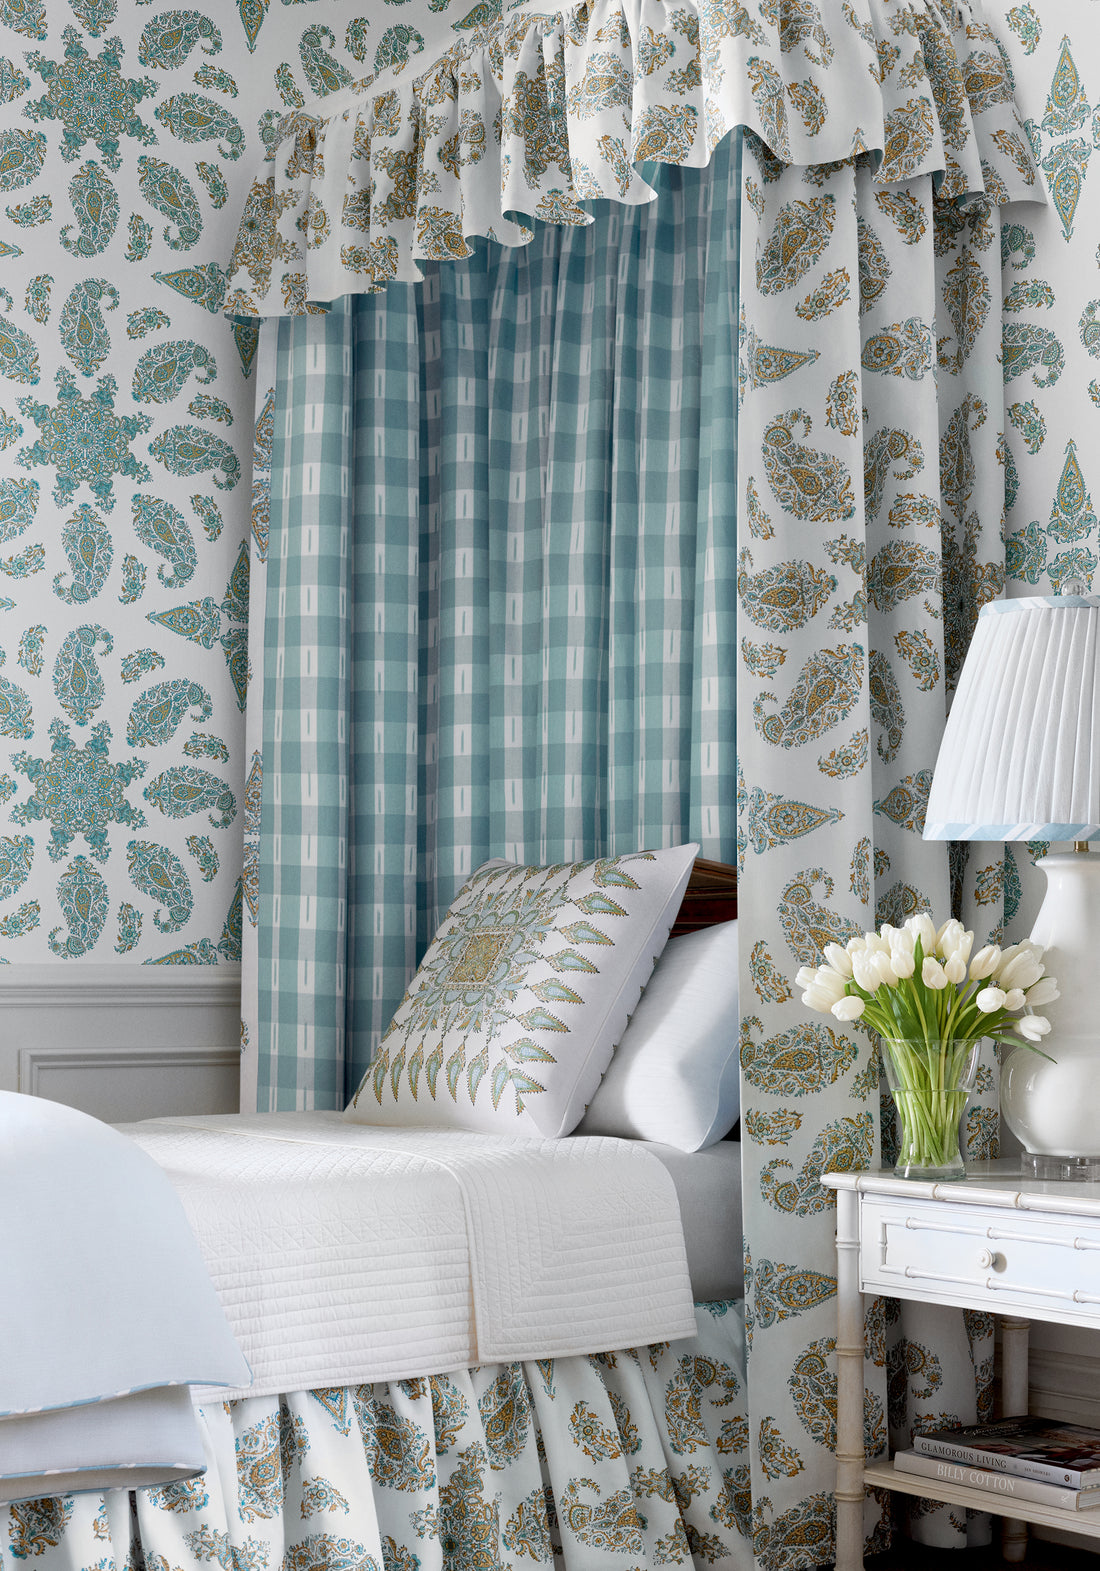 Curtains featuring Ellastone Check fabric in seaglass color - pattern number W736438 - by Thibaut in the Indienne collection